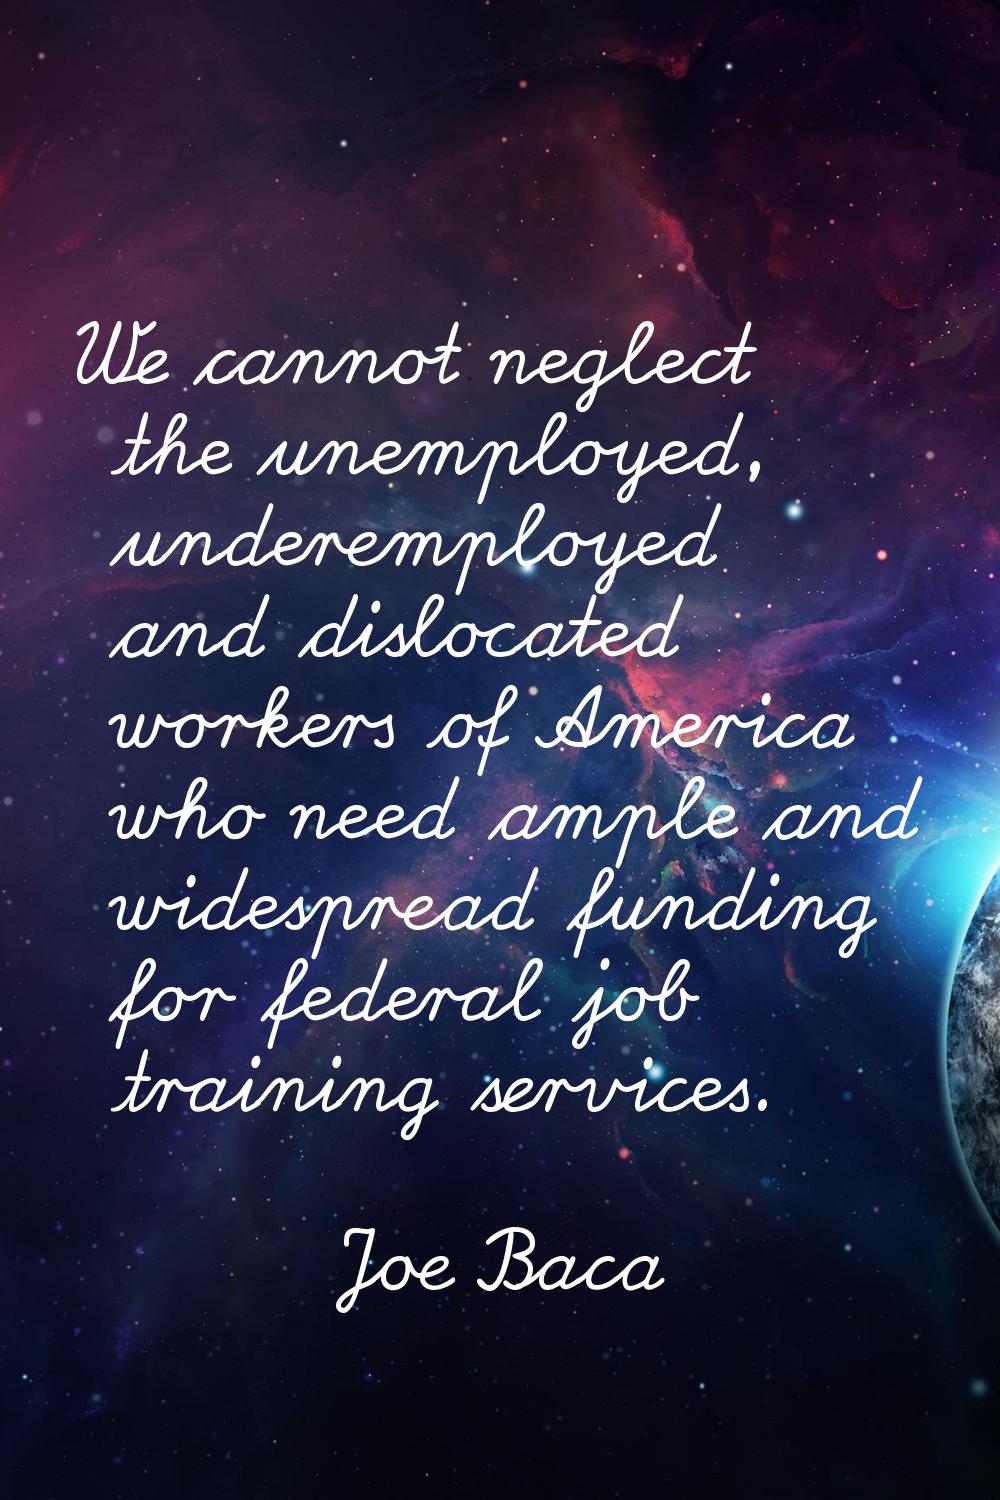 We cannot neglect the unemployed, underemployed and dislocated workers of America who need ample an